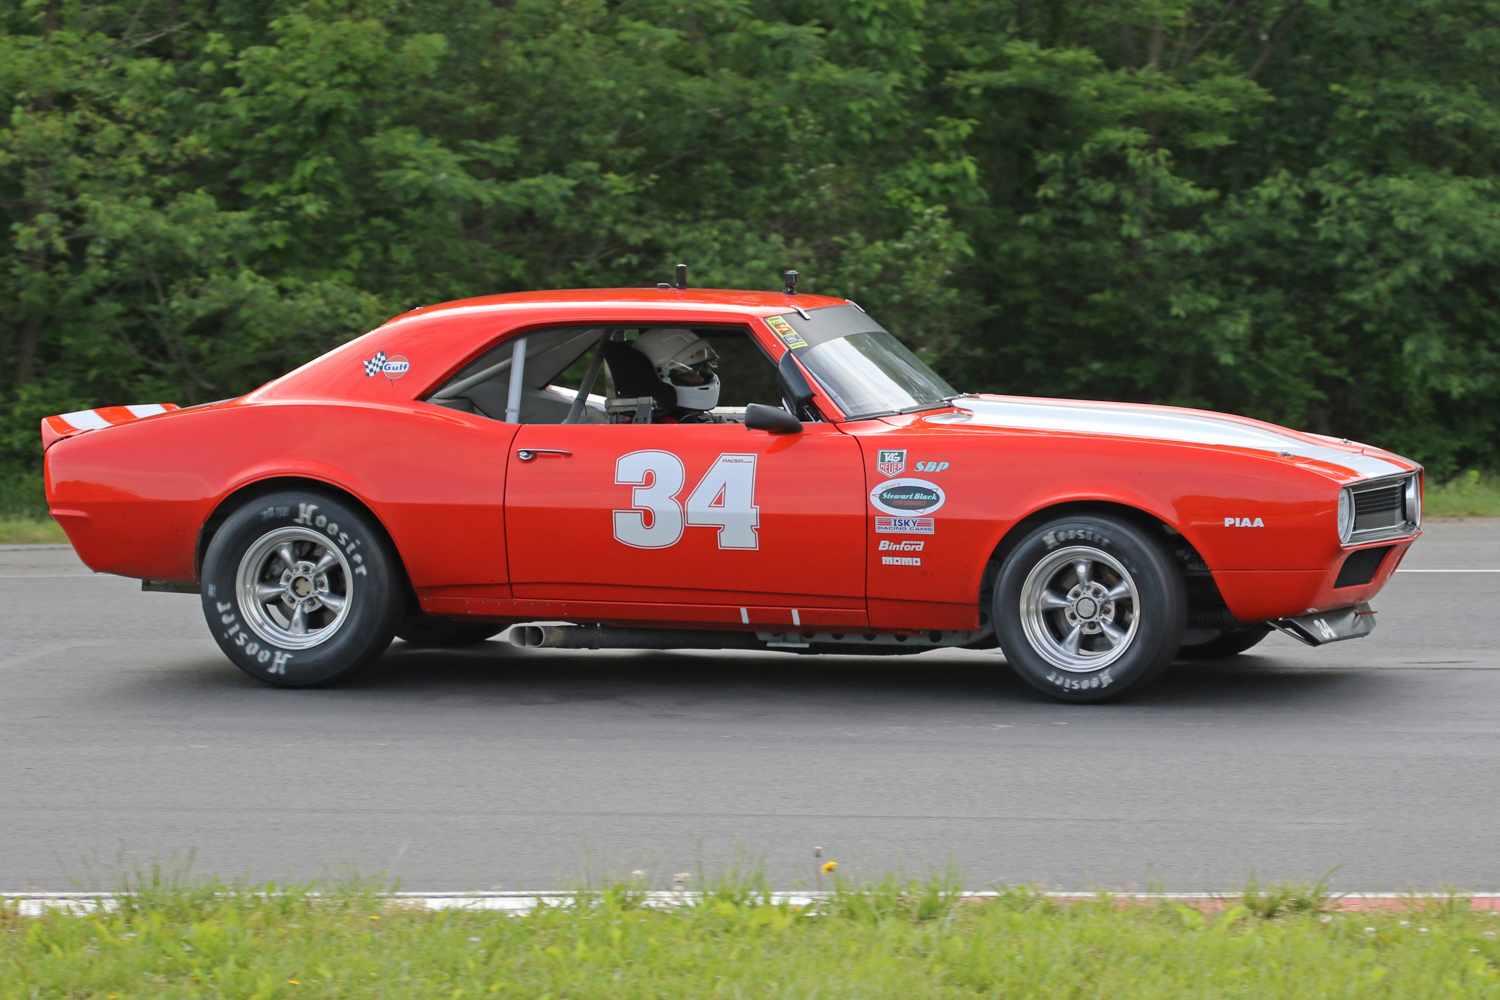 2019 Jefferson 500 - Summit Point, WV - VRG - May 16-19, 2019 M. M. "Mike" Matune Jr.